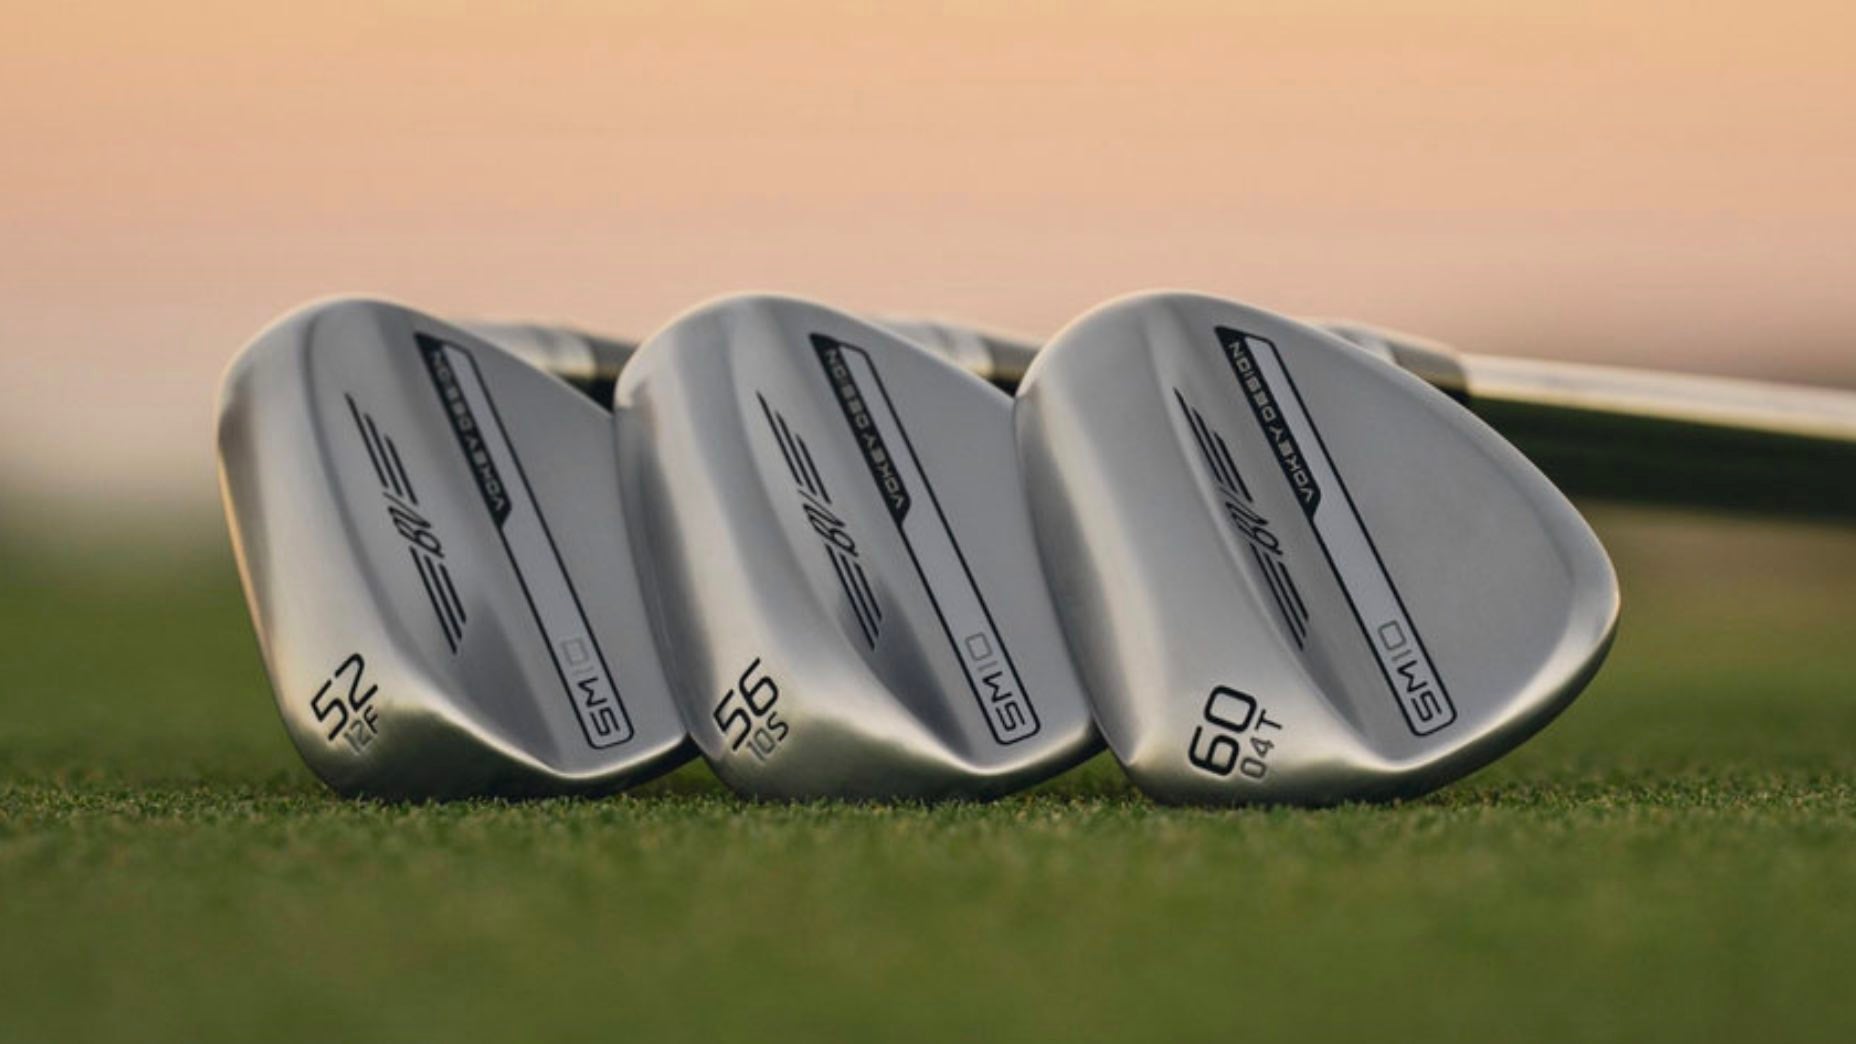 Titleist’s Vokey SM10 wedges debuting in Hawaii at Sentry Daily Sports